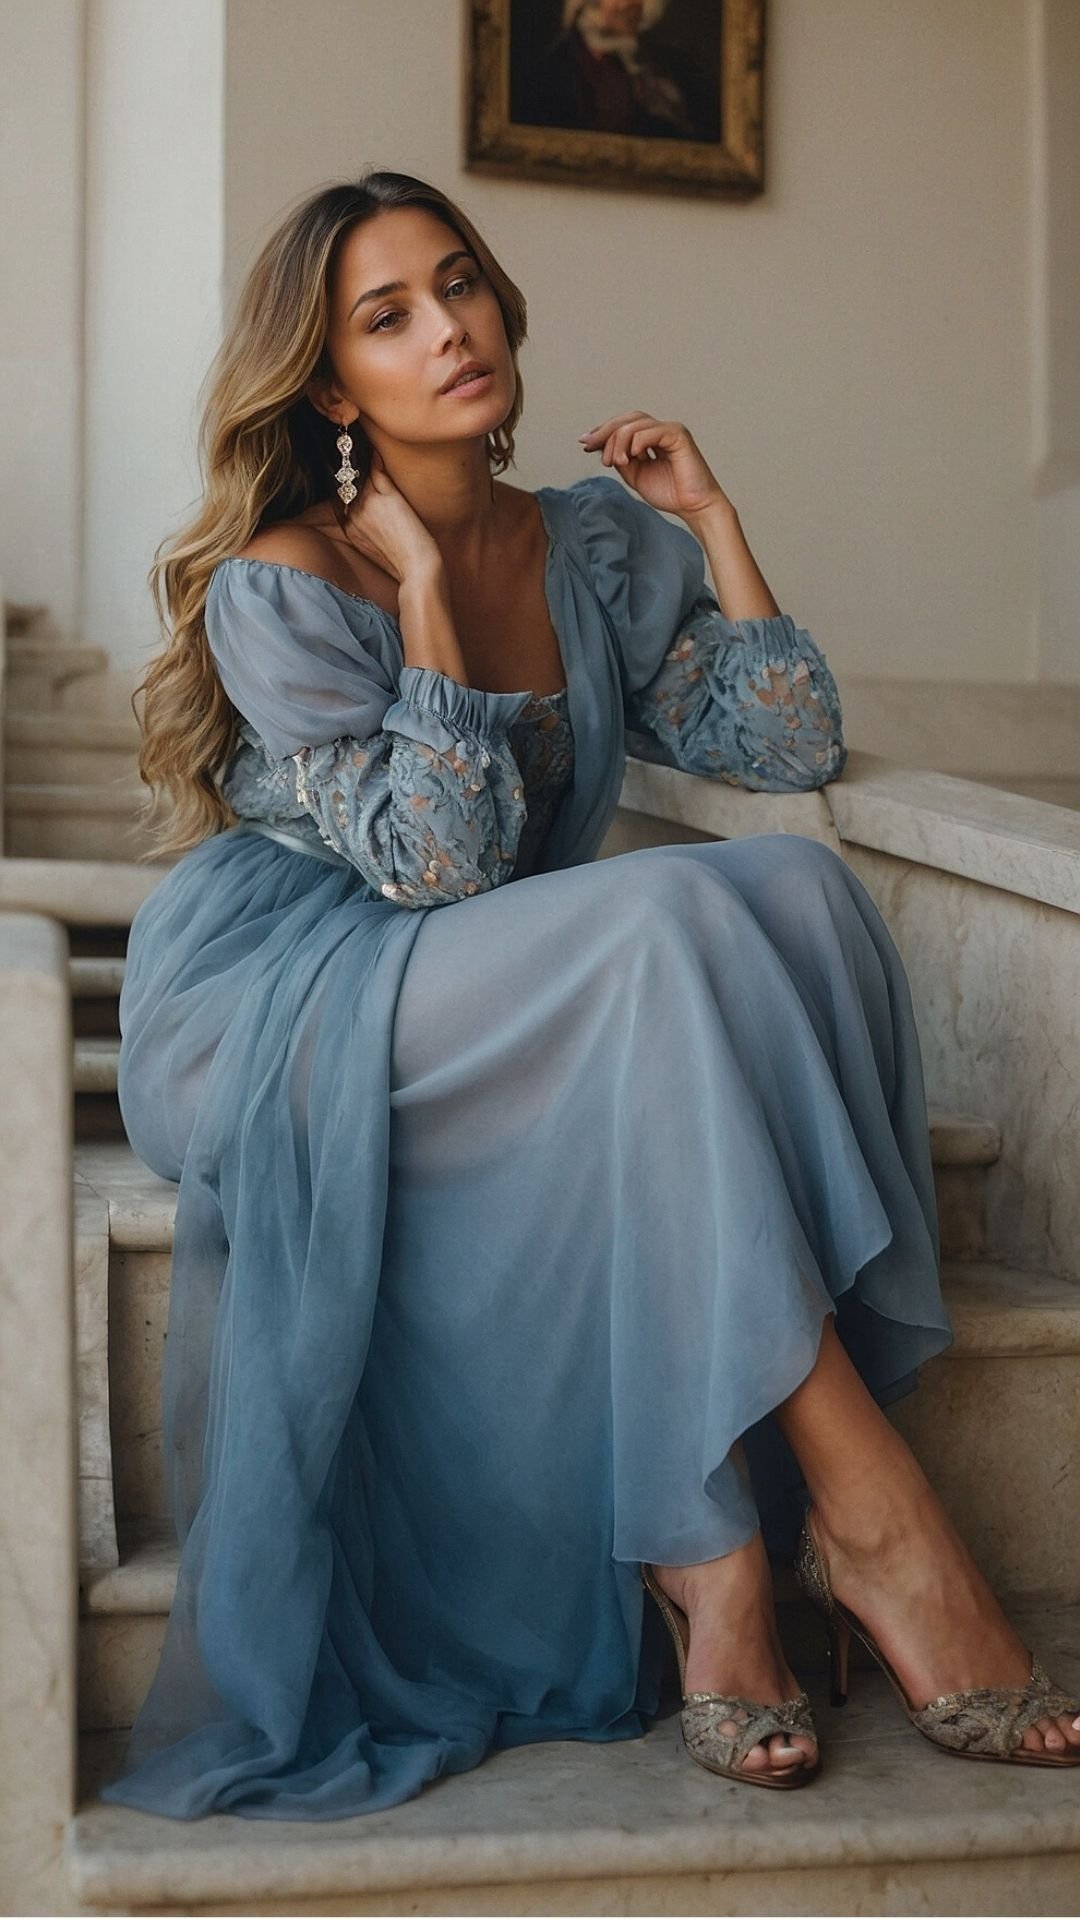 Elegant Contemplation: Blue Gown and Grand Staircase Wallpaper